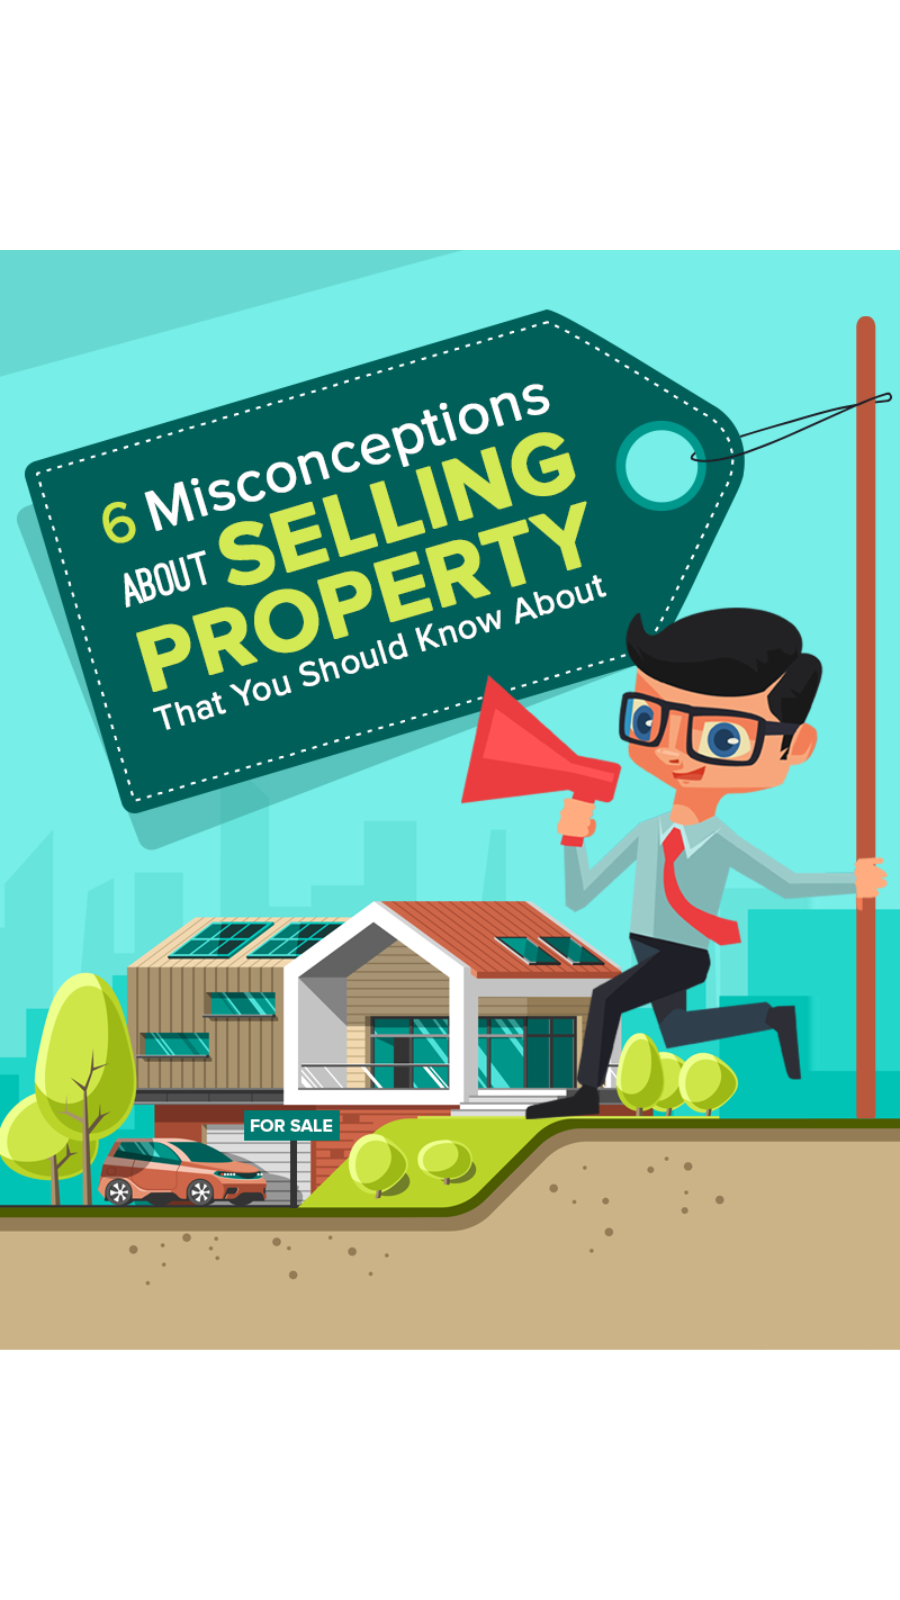 6 Misconceptions About Selling Property in Santa Cruz That You Should Know About